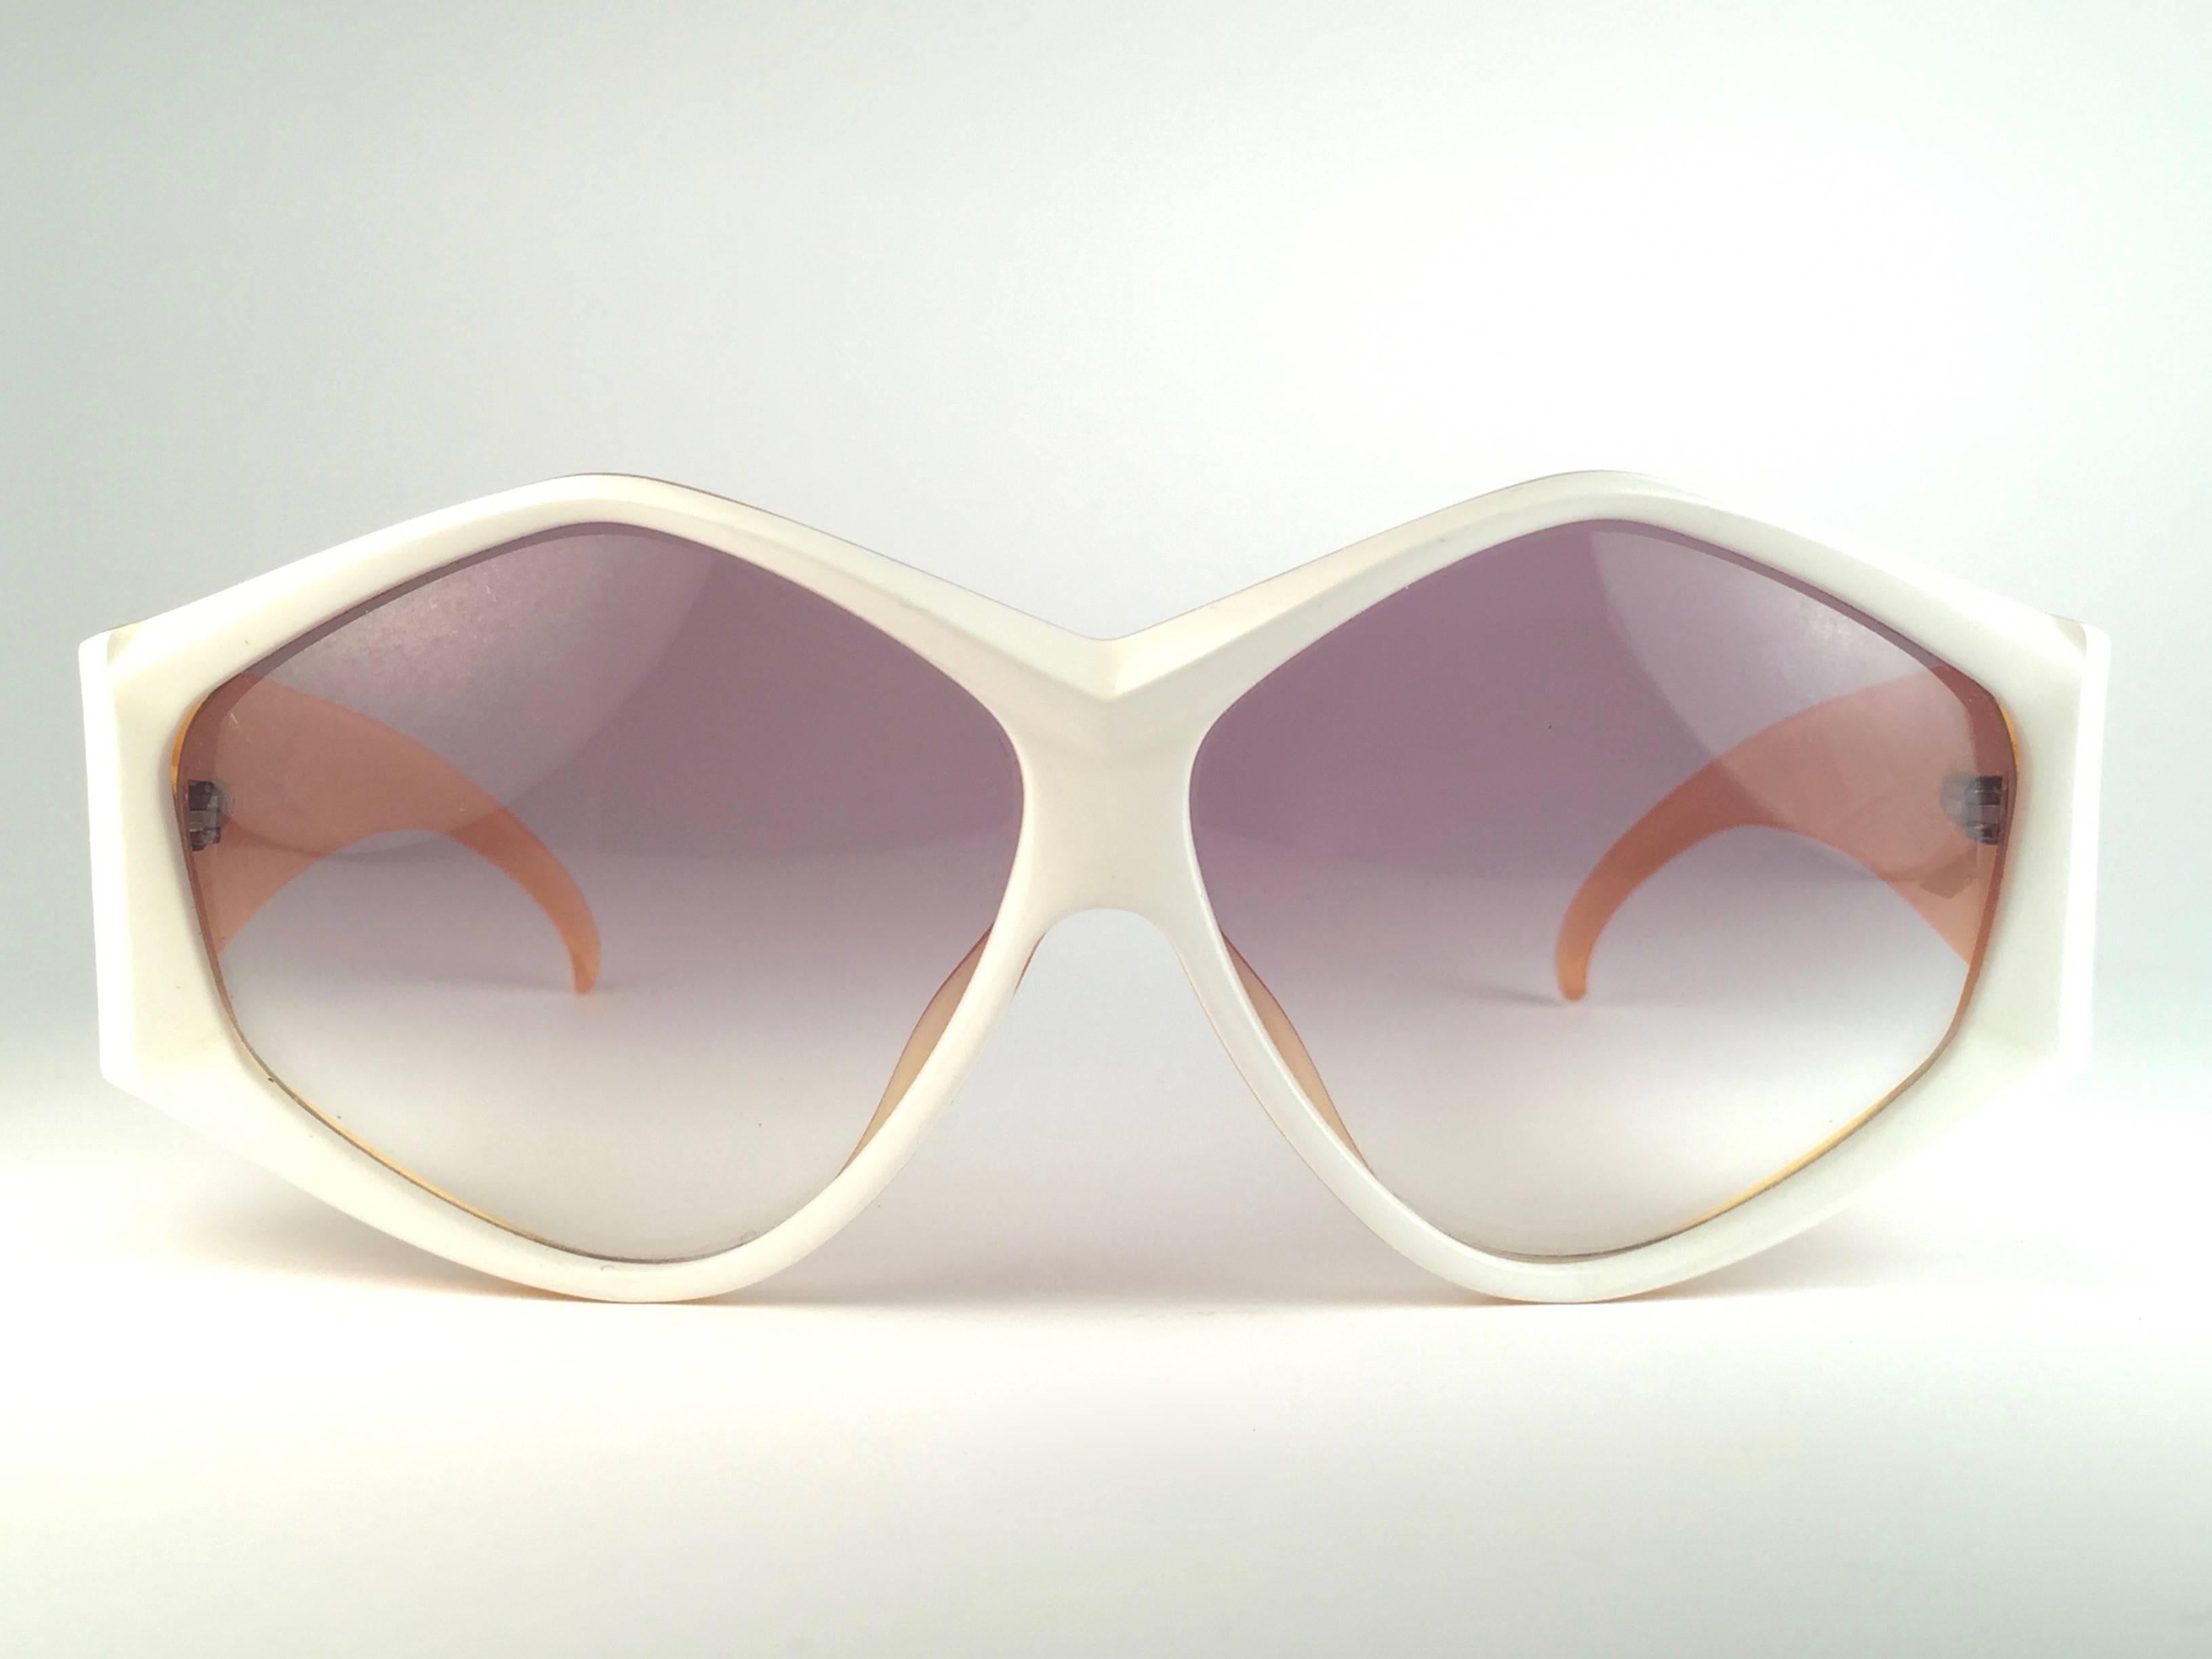 New Vintage Christian Dior 2230 70 White Origami frame with spotless light brown gradient lenses. 

Made in Germany.
 
Produced and design in 1970's.

A collector’s piece!

New, never worn or displayed. Comes with its original silver Christian Dior